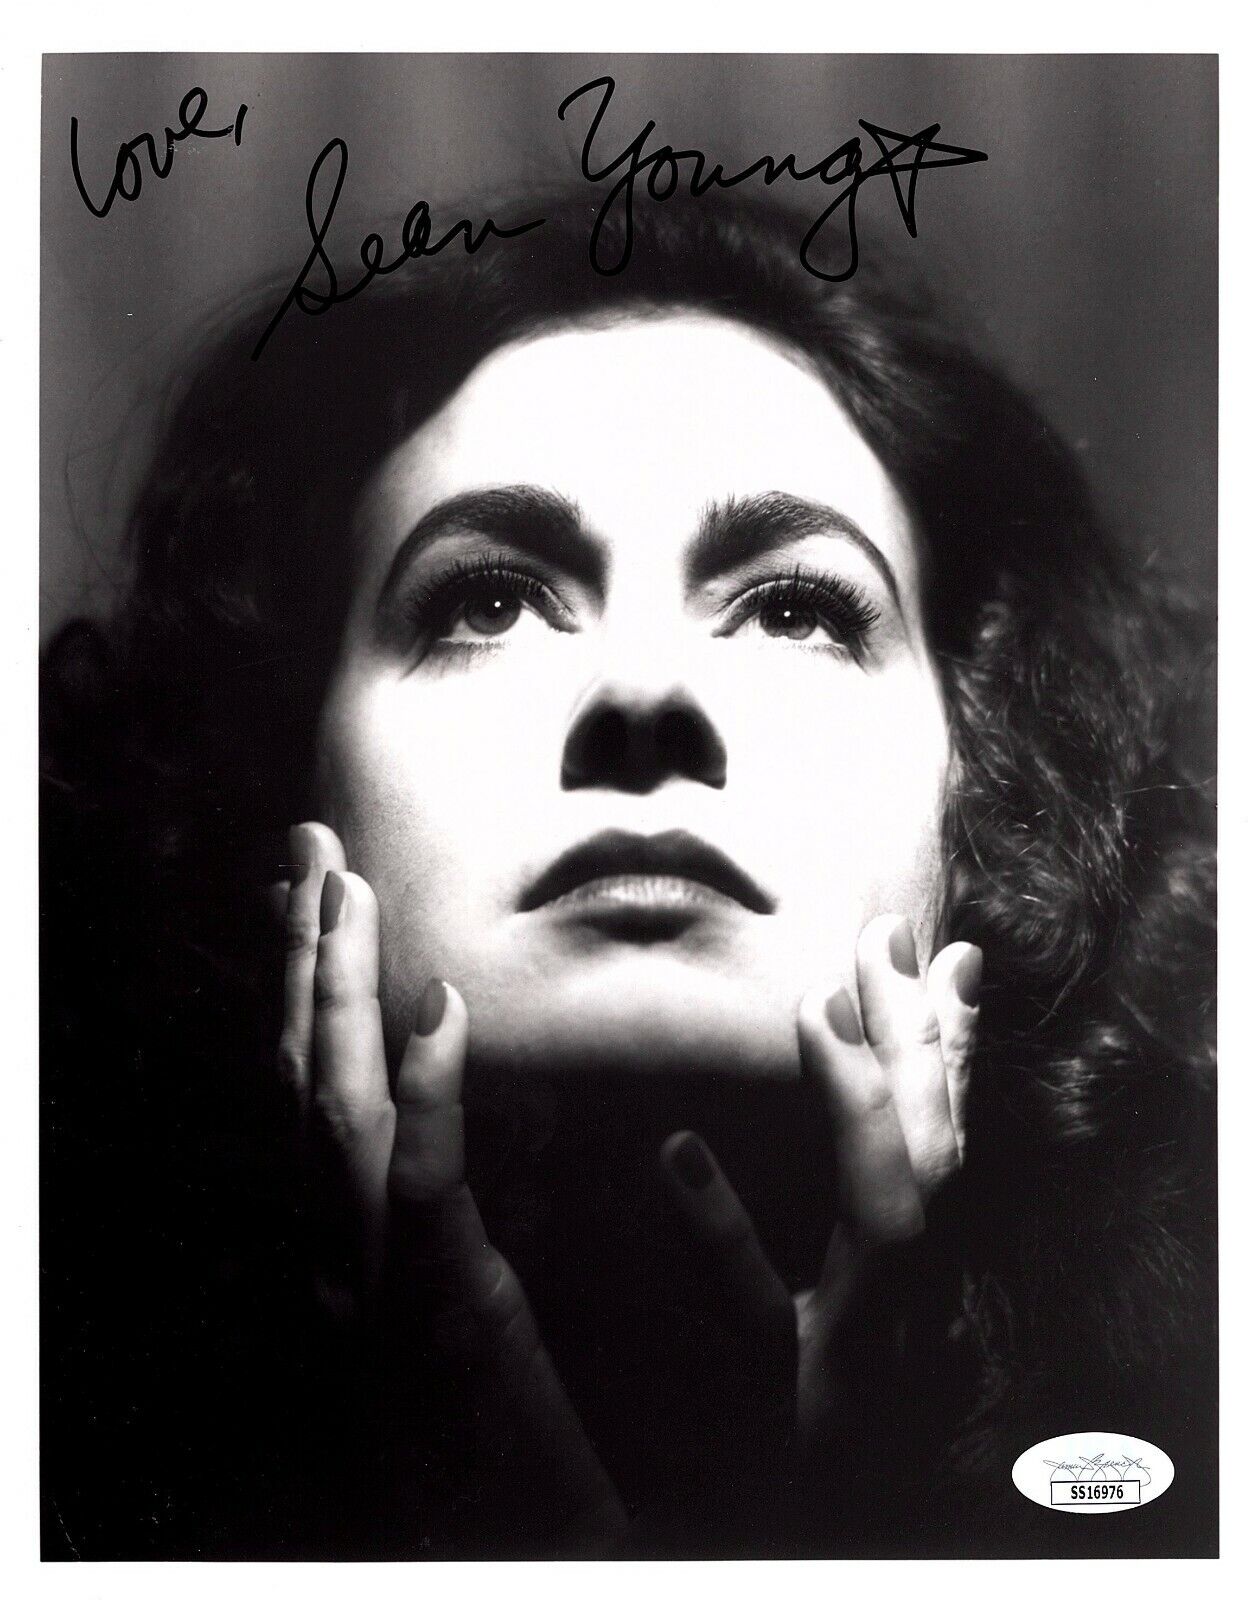 SEAN YOUNG Autograph Hand SIGNED 8x10 Photo Poster painting BLADE RUNNER JSA CERTIFIED SS16976